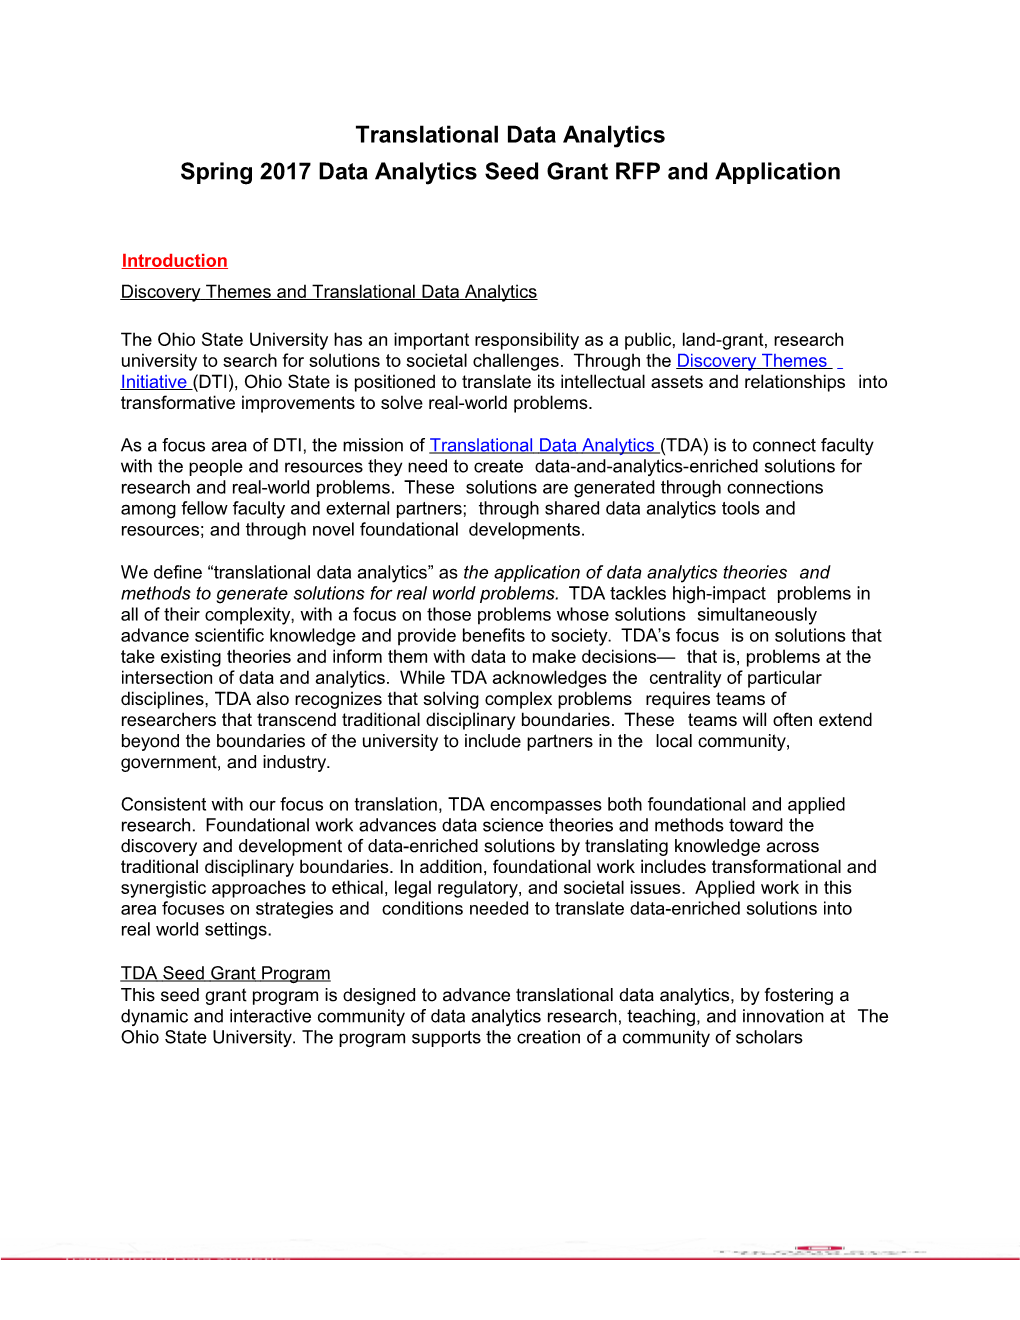 Spring 2017 Data Analytics Seed Grant RFP and Application